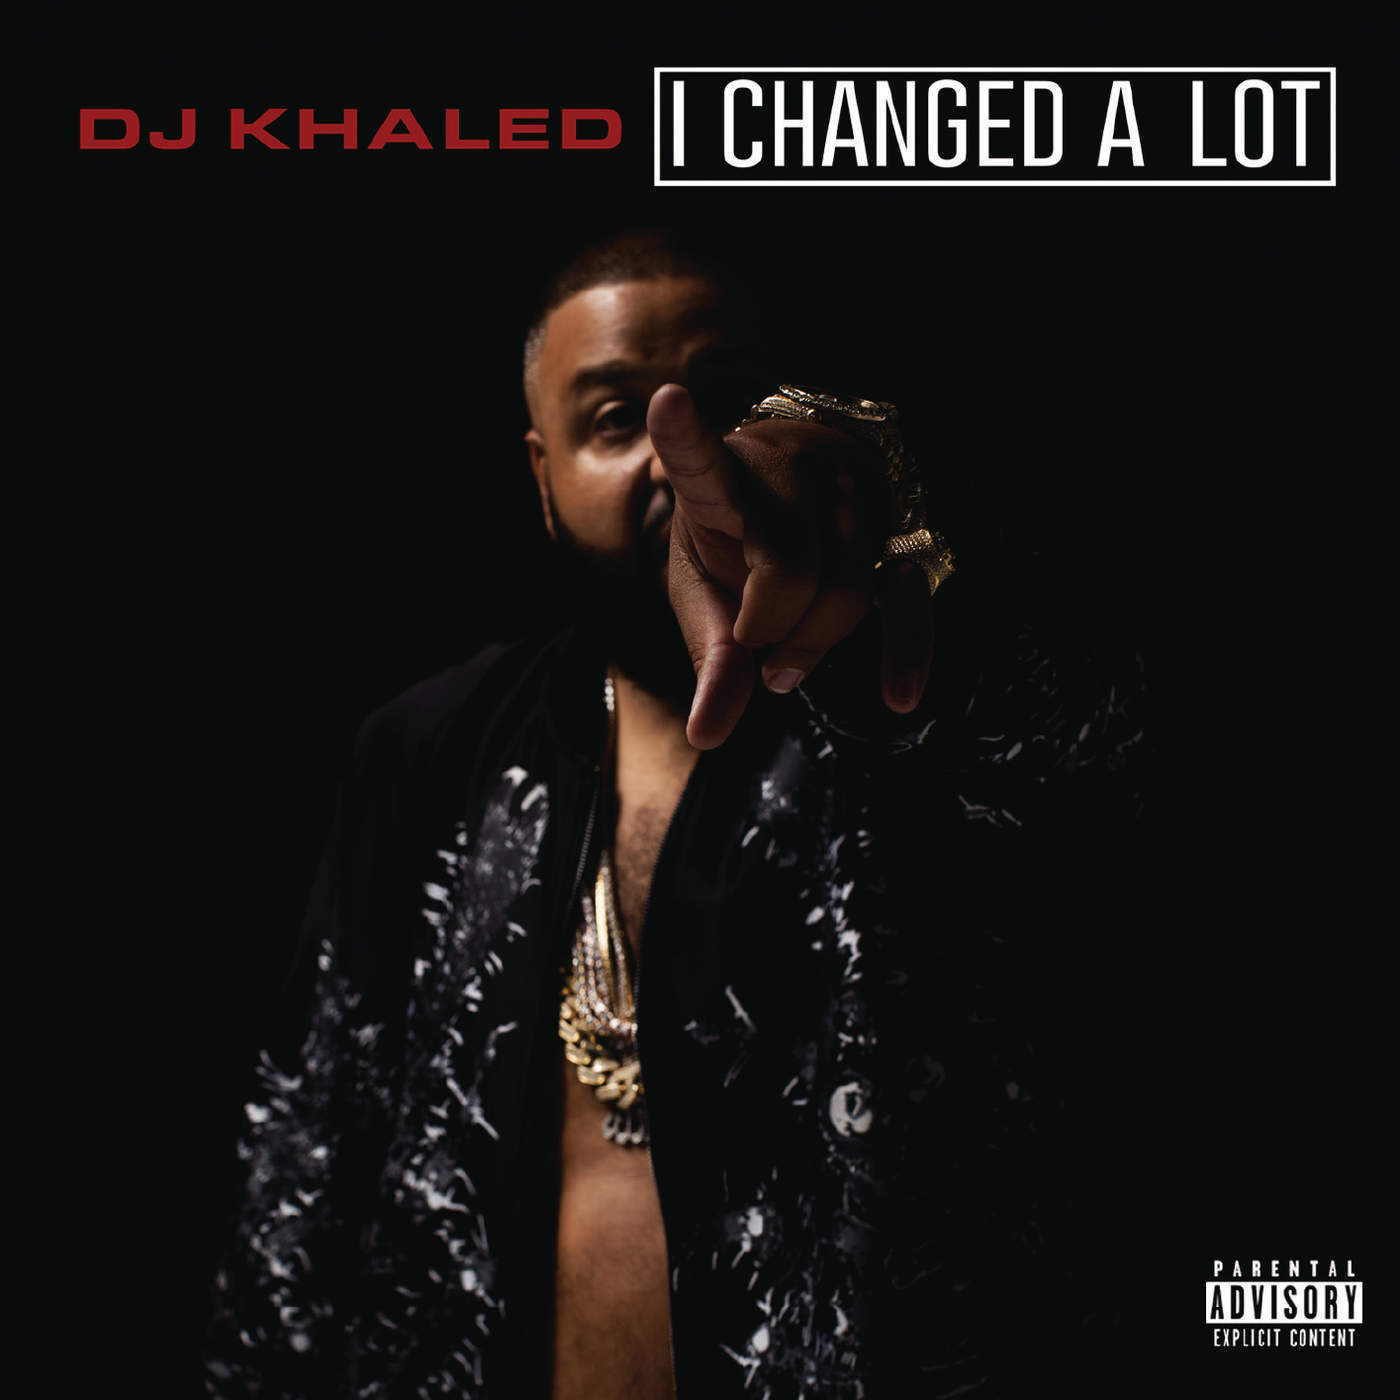 DJ Khaled - I Changed a Lot [Deluxe Version] (2015/AAC)